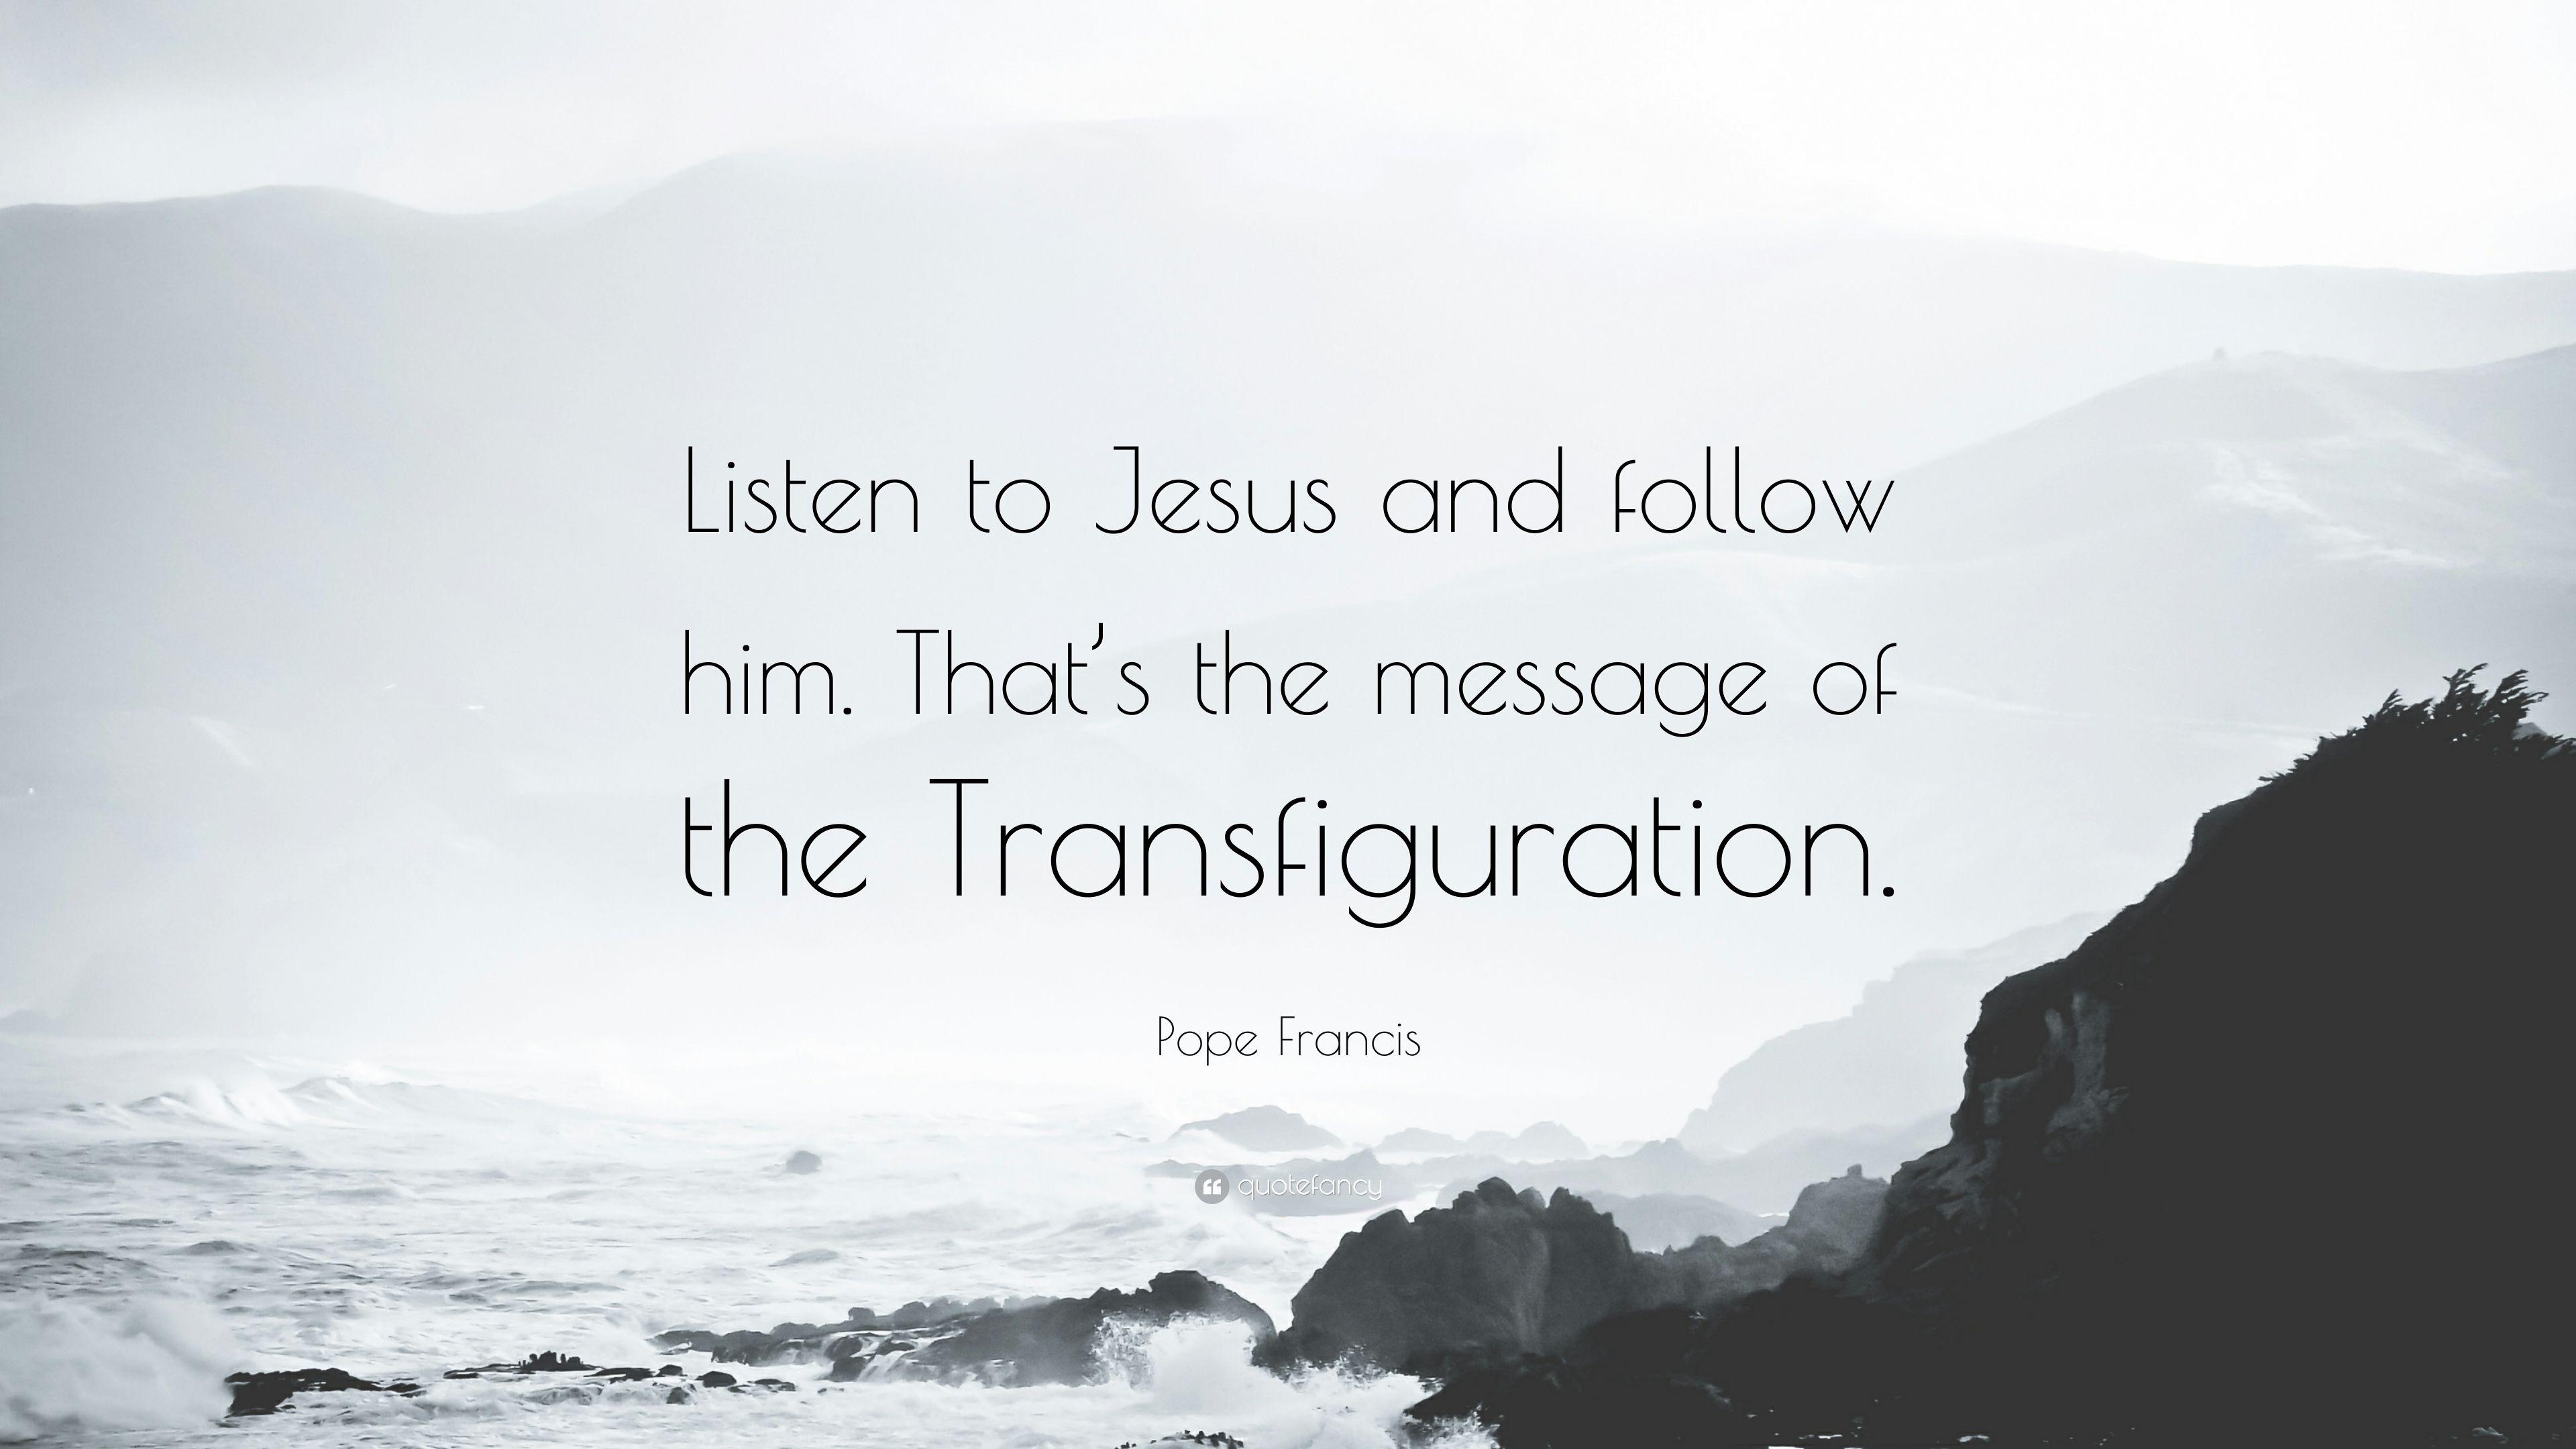 Pope Francis Quote: “Listen to Jesus and follow him. That's the